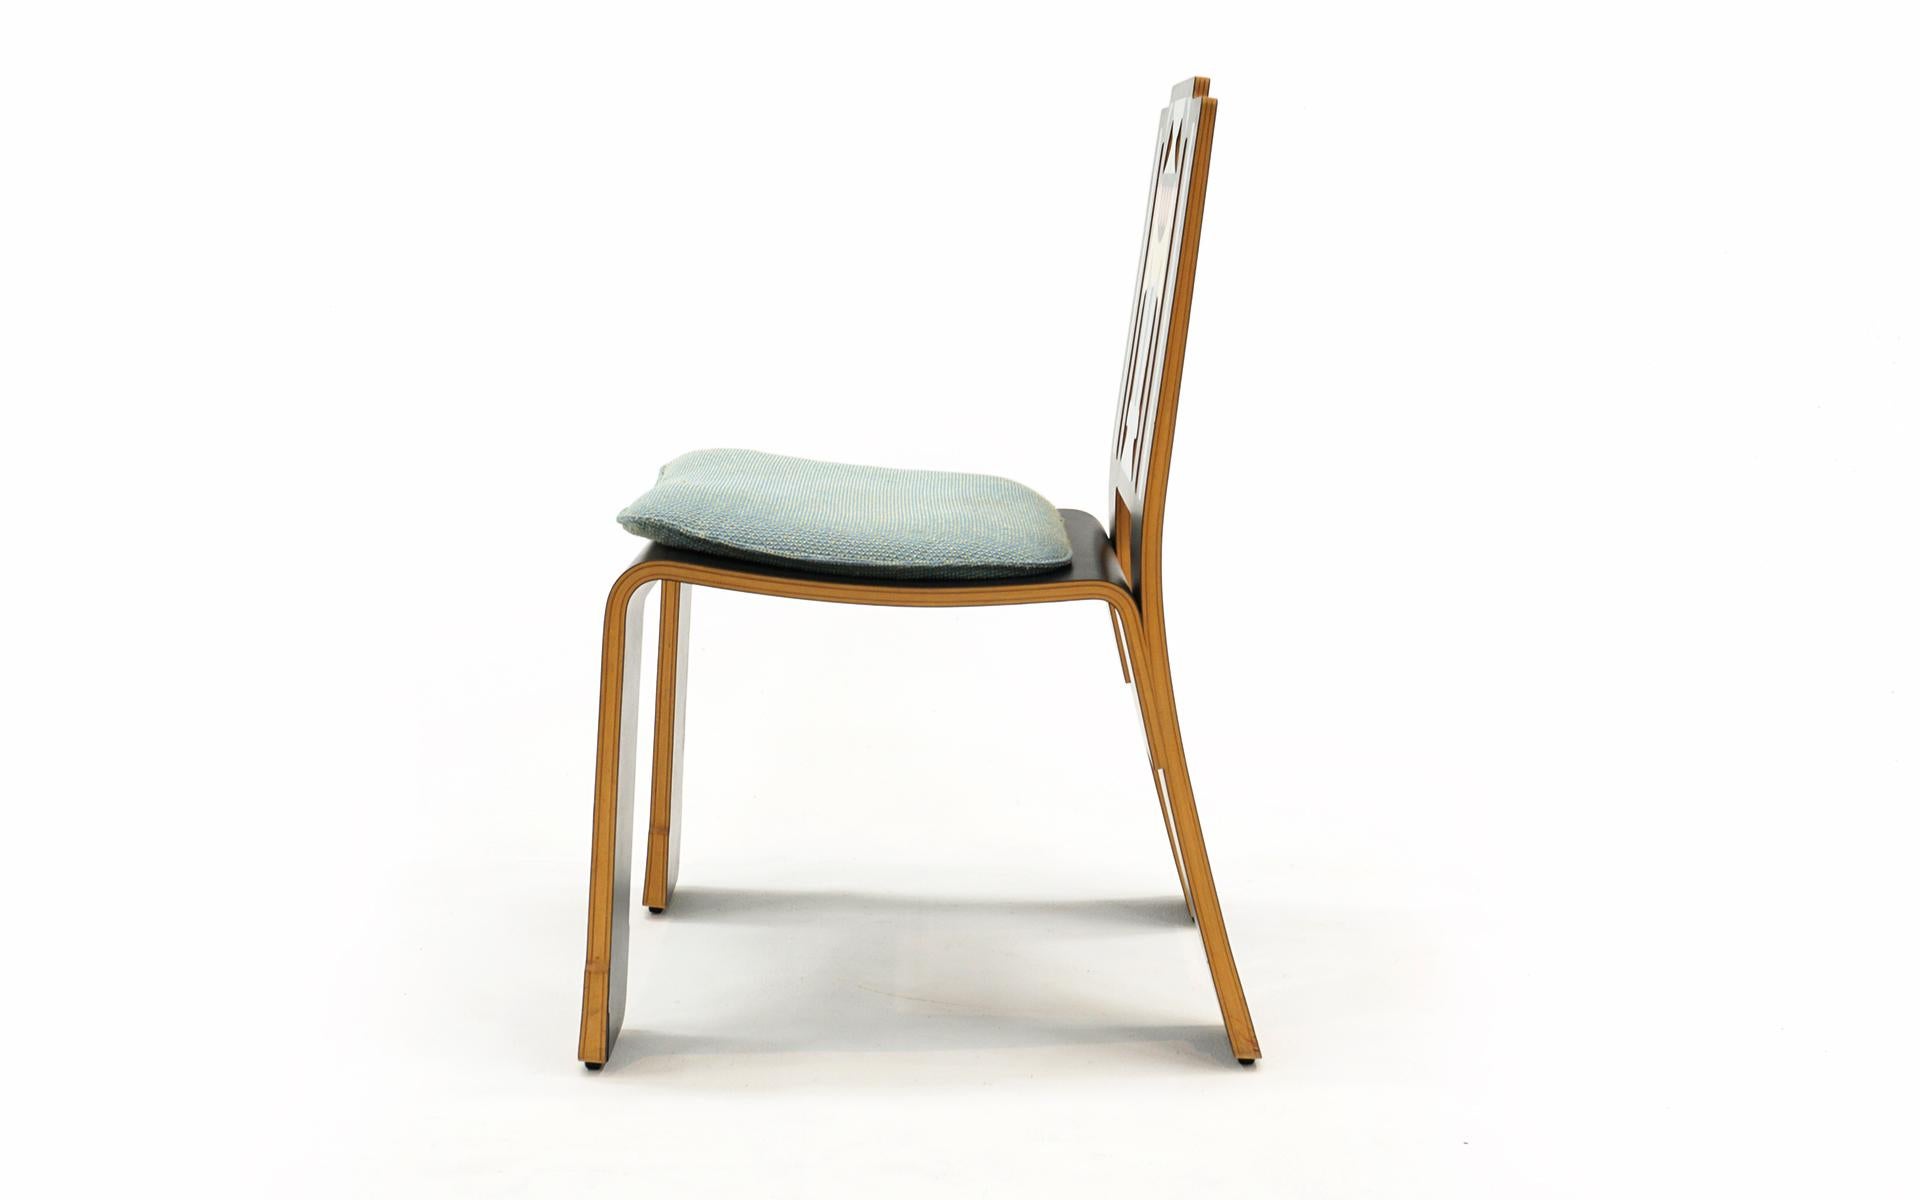 Sheraton chair designed by Robert Venturi and Denise Scott Brown for Knoll in 1984. This example has a manufacturing date of June 1, 1987 as shown on the label on the underside of the chair. The light blue cushion has no tears or holes with few